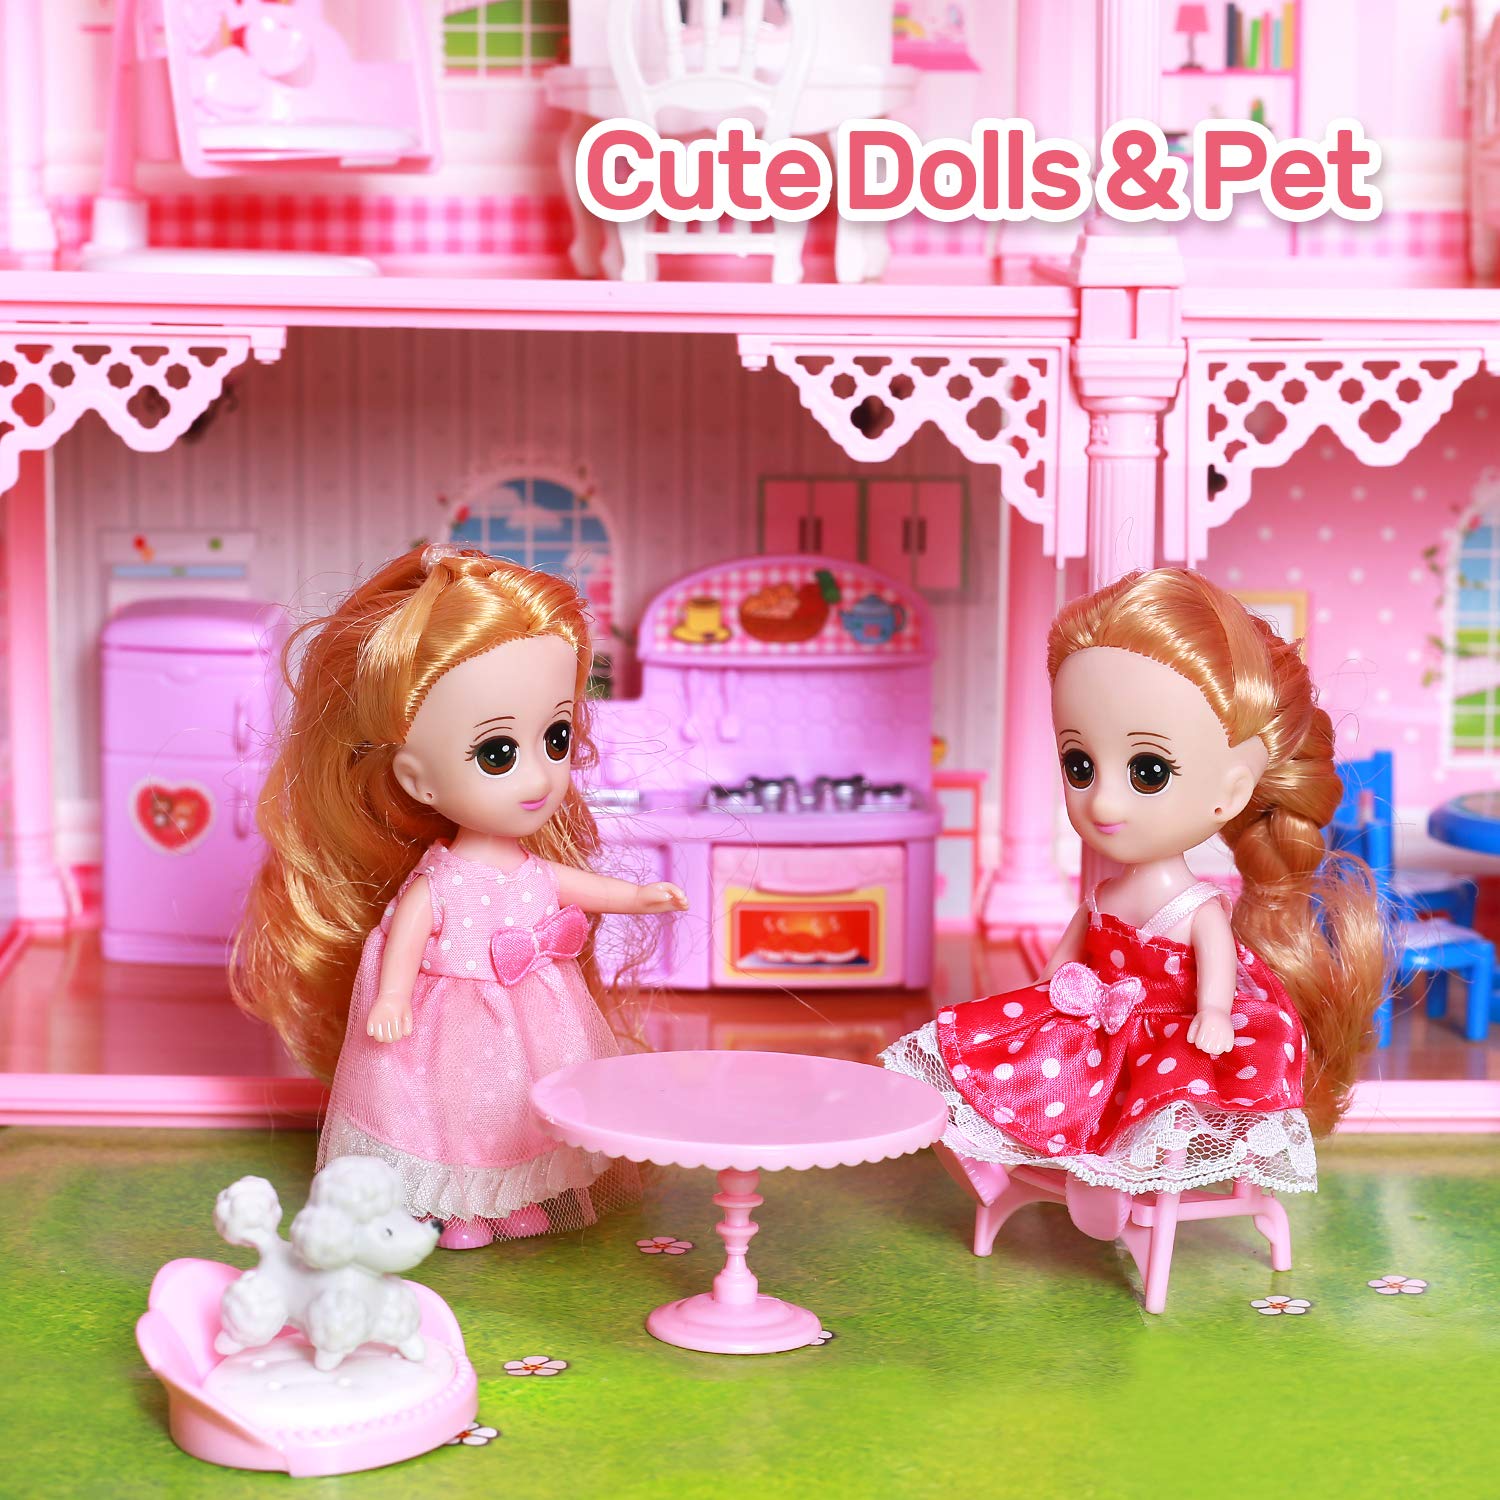 CUTE STONE Dollhouse, Doll House with Flashing Lights, Pretend Play Toddler Dollhouse Sets with 2 Dolls, Furniture, 8 Rooms and Doll Accessories, Creative Gift for Girls, L32 xH23